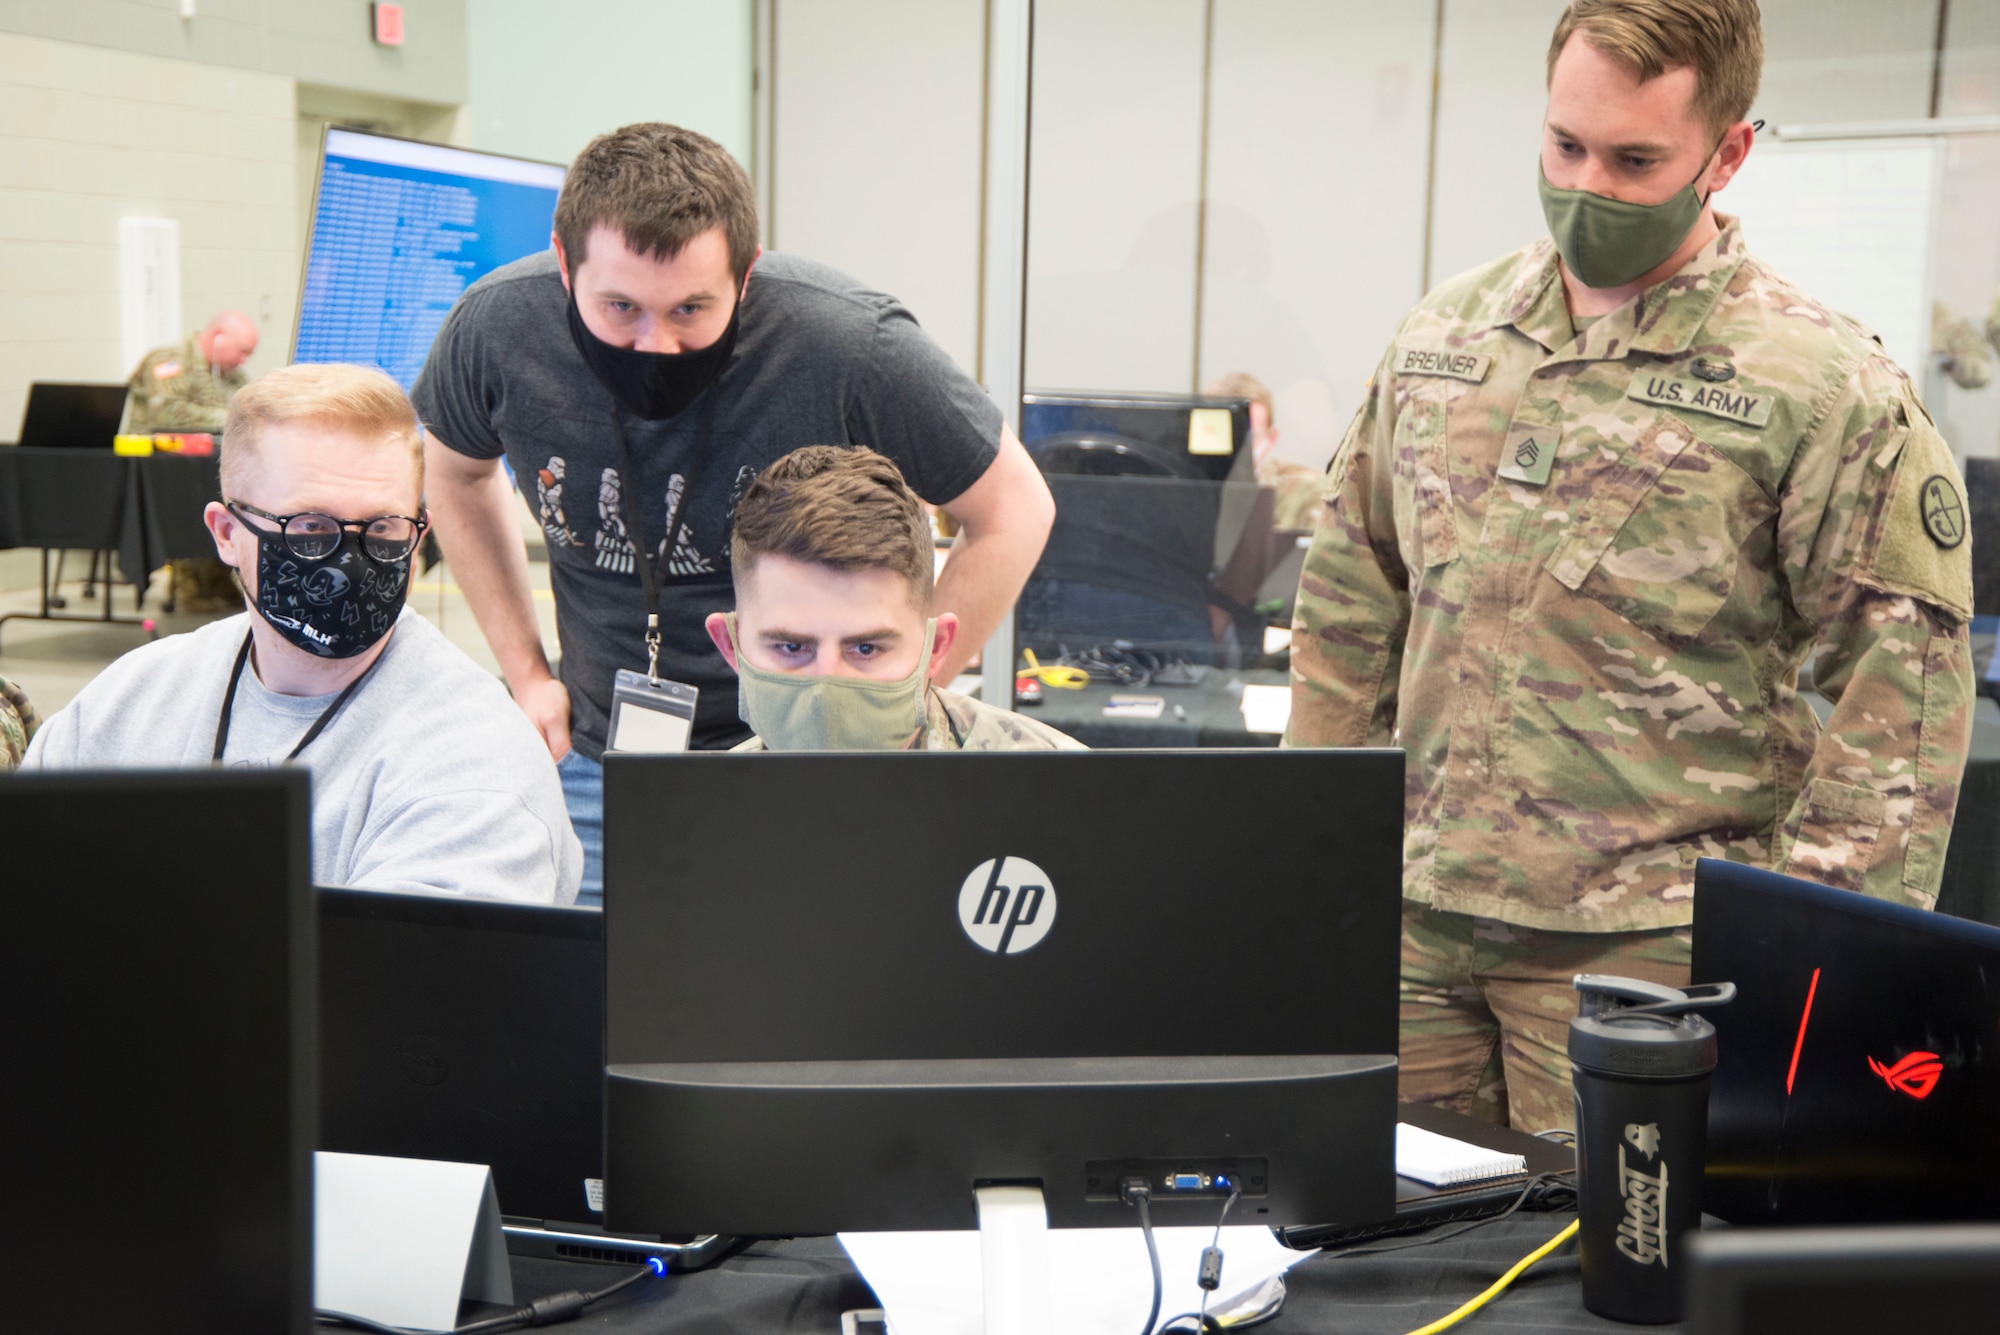 U.S. Army Staff Sgt. Paul Coffy, center, seated, views a virtual exercise environment as two West Virginia University students and U.S. Army Staff Sgt. Adam Brenner, right, observe at the Morgantown National Guard Readiness Center. The international Locked Shields 2021 cyber defense exercise was held the week of April 12, 2021.